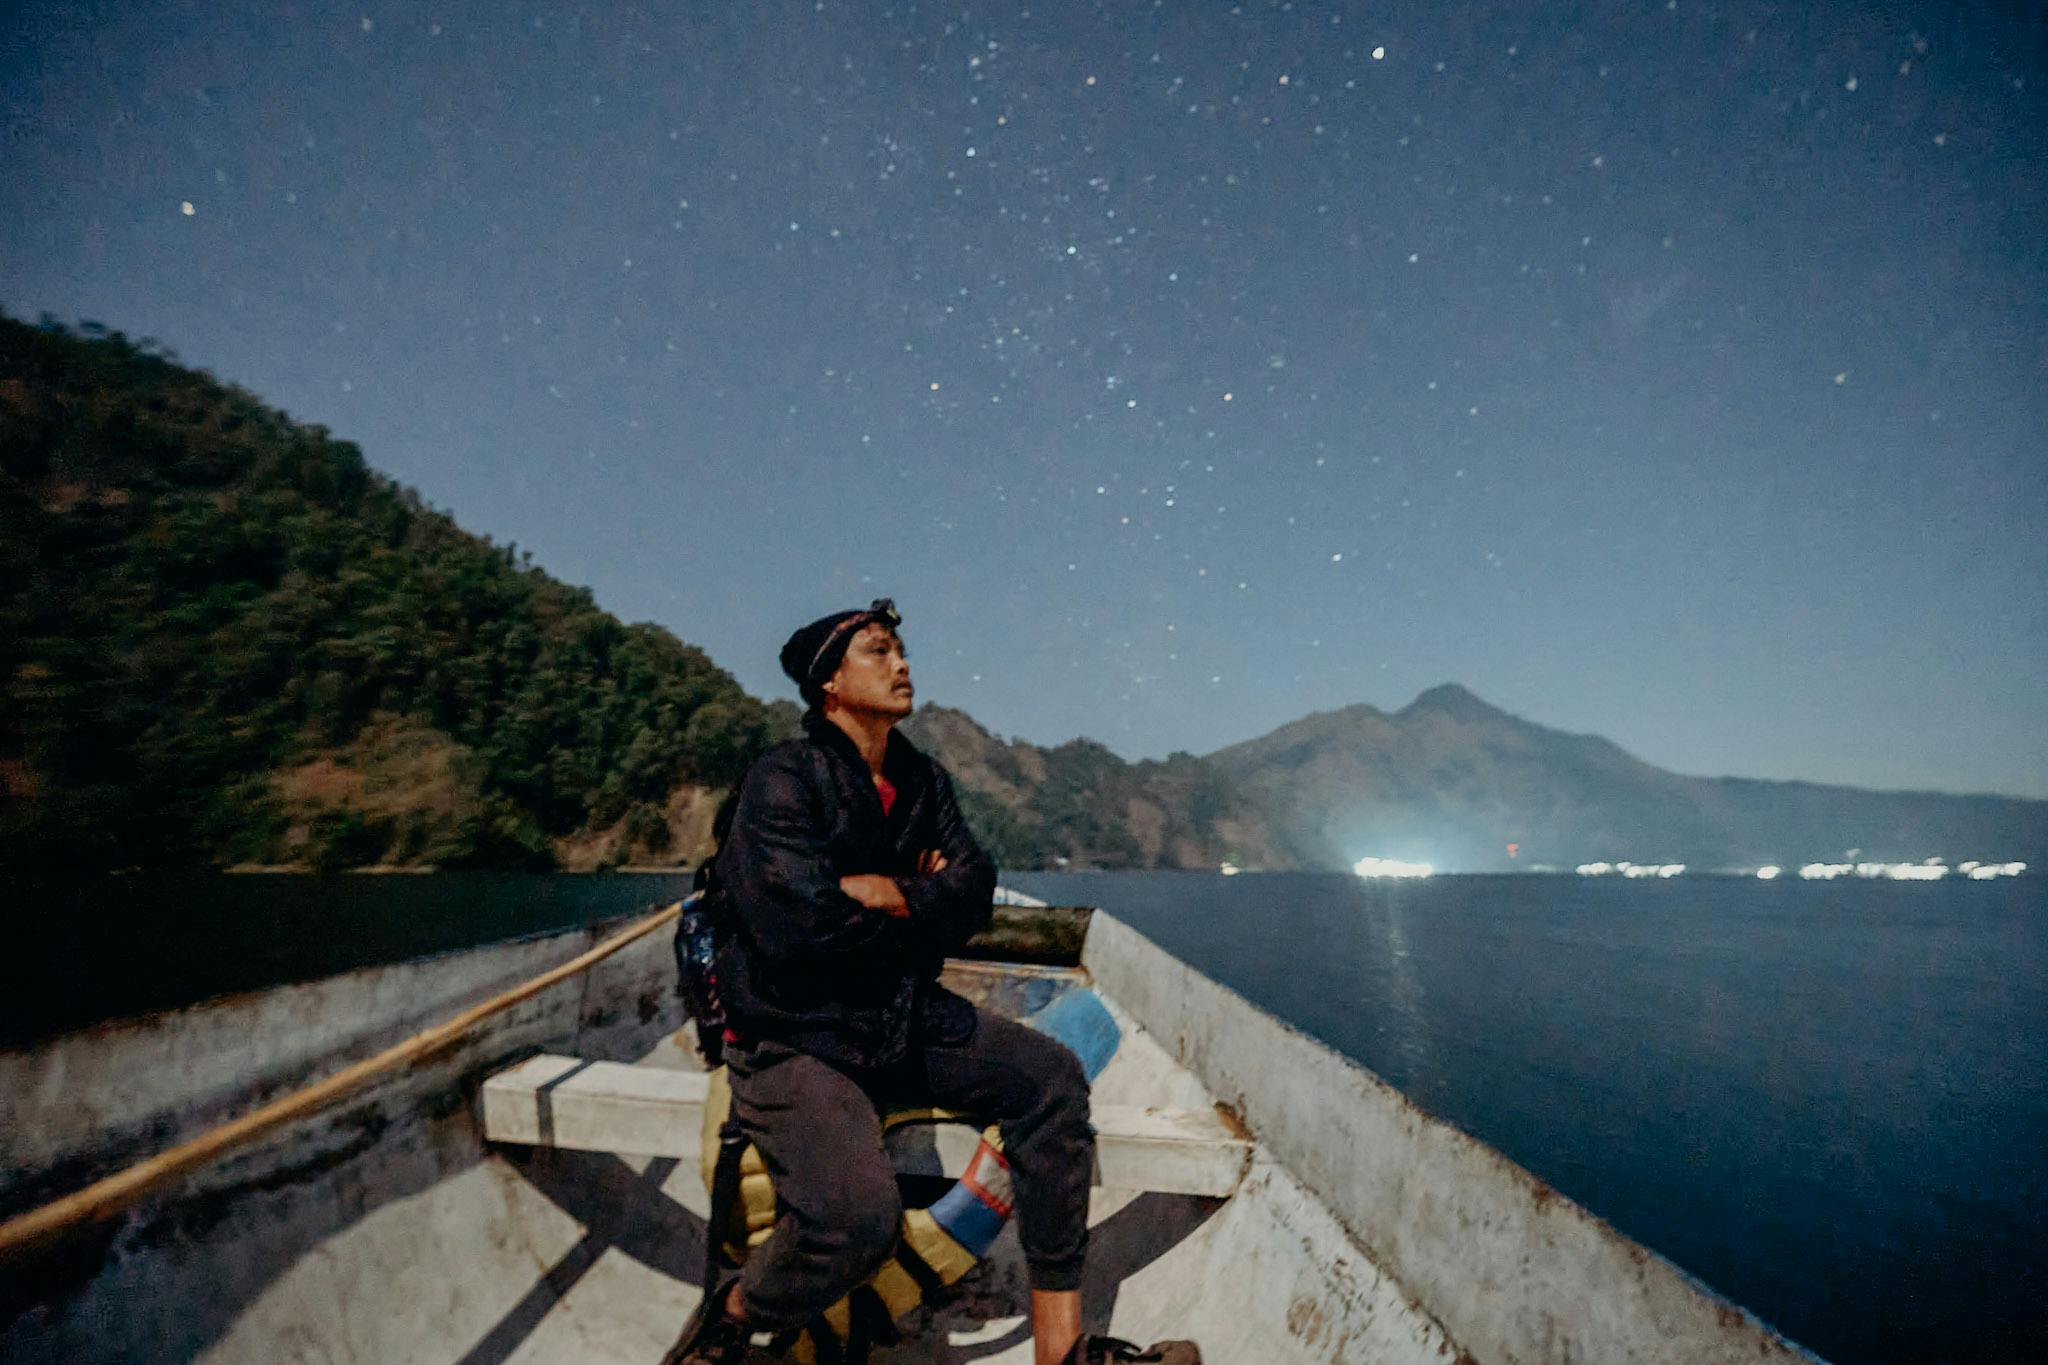 One of the most magical part of the experience is the boat ride across Lake Batur under a starry sky